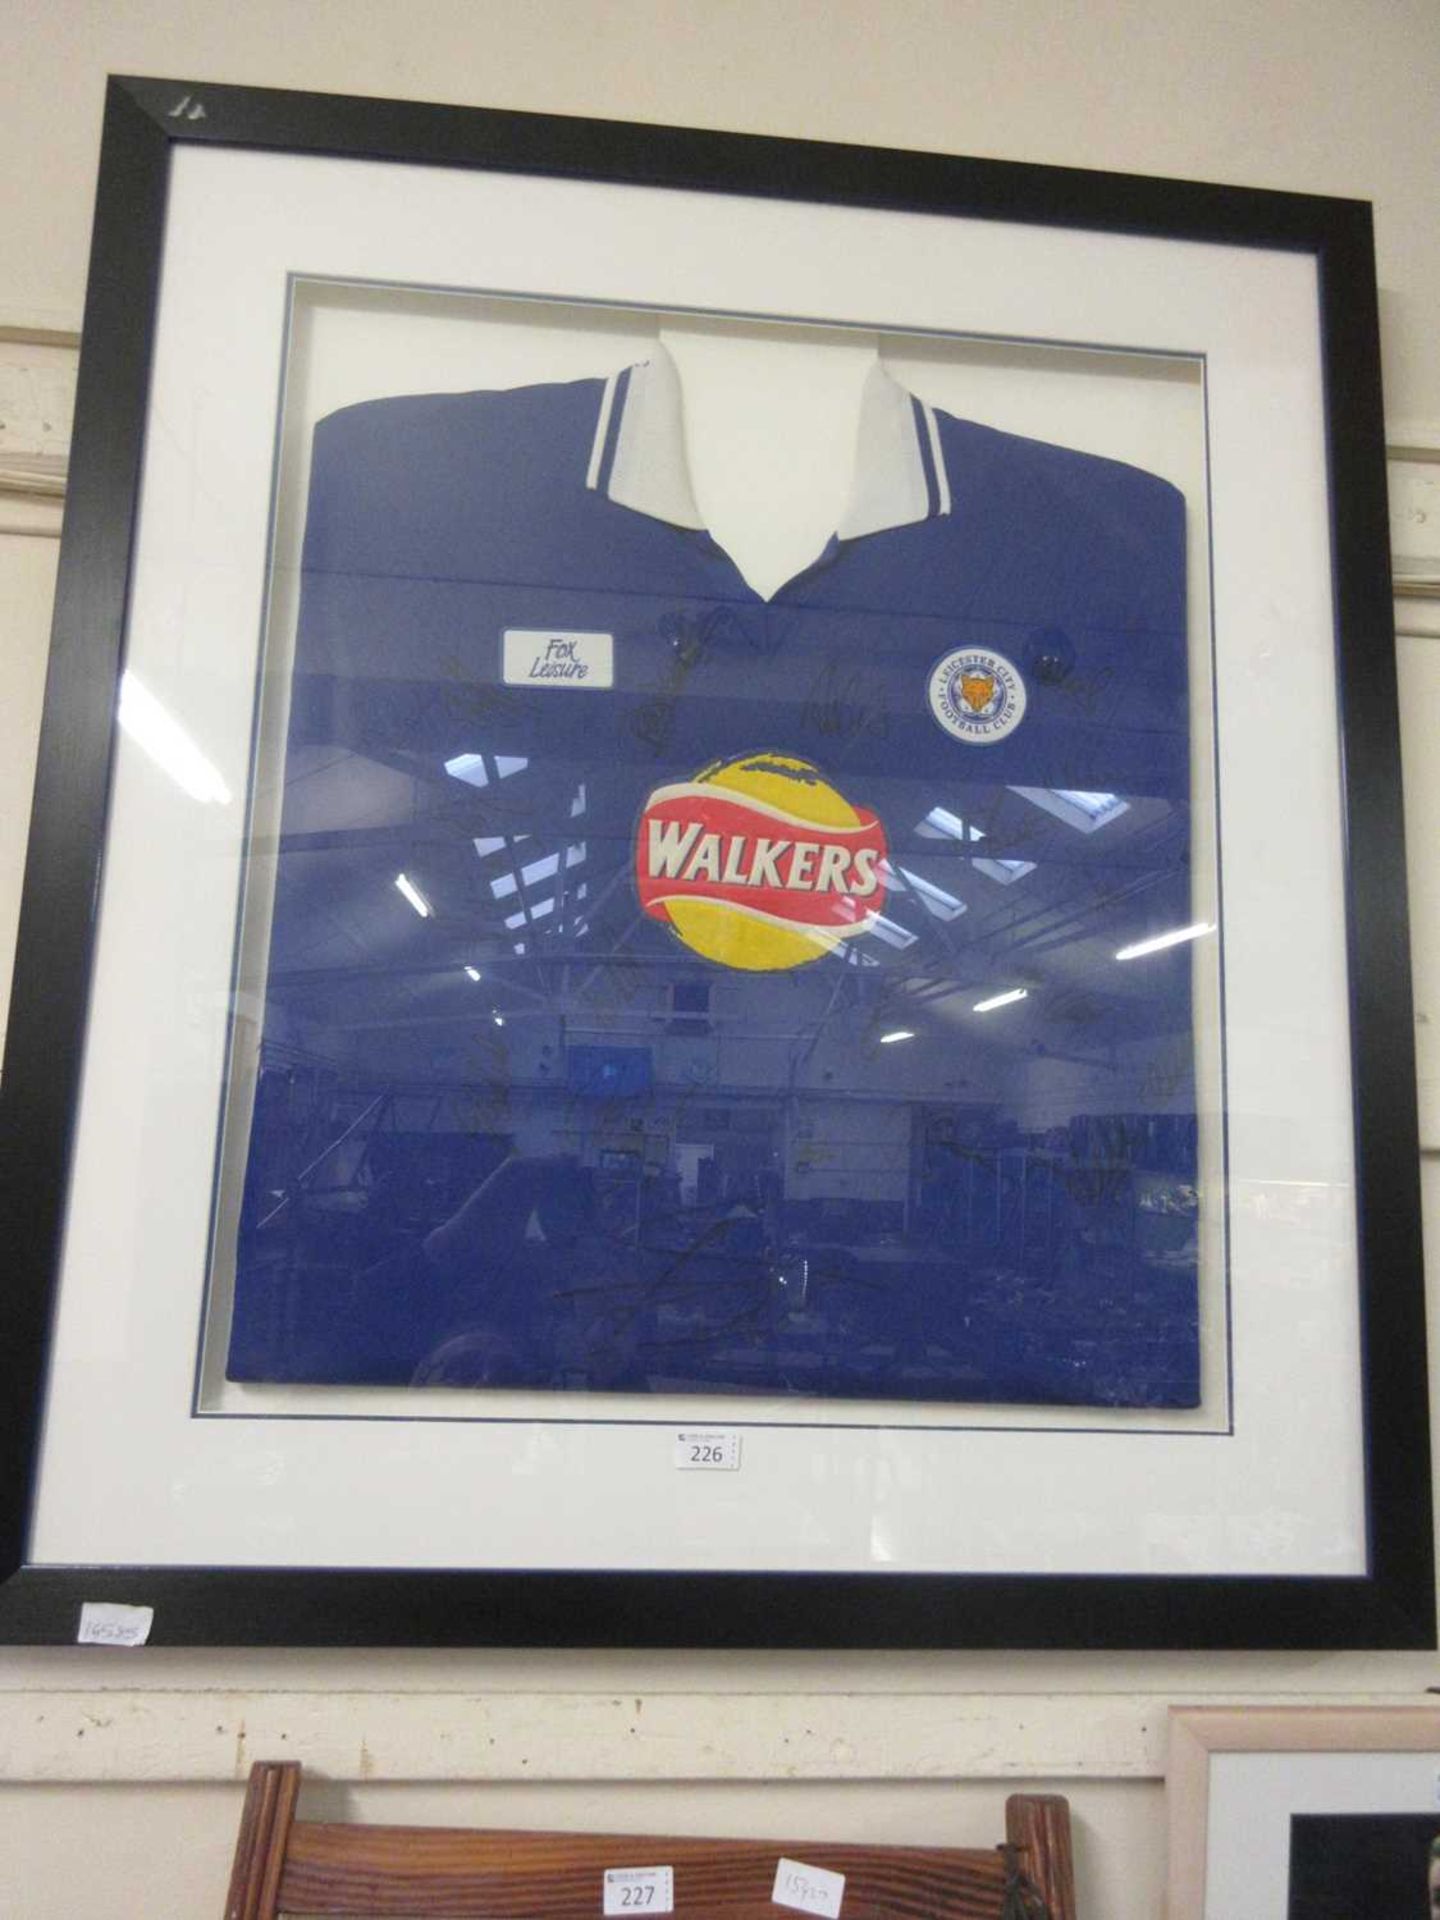 A framed and glazed display of signed 2009/2010 Leicester City football shirt